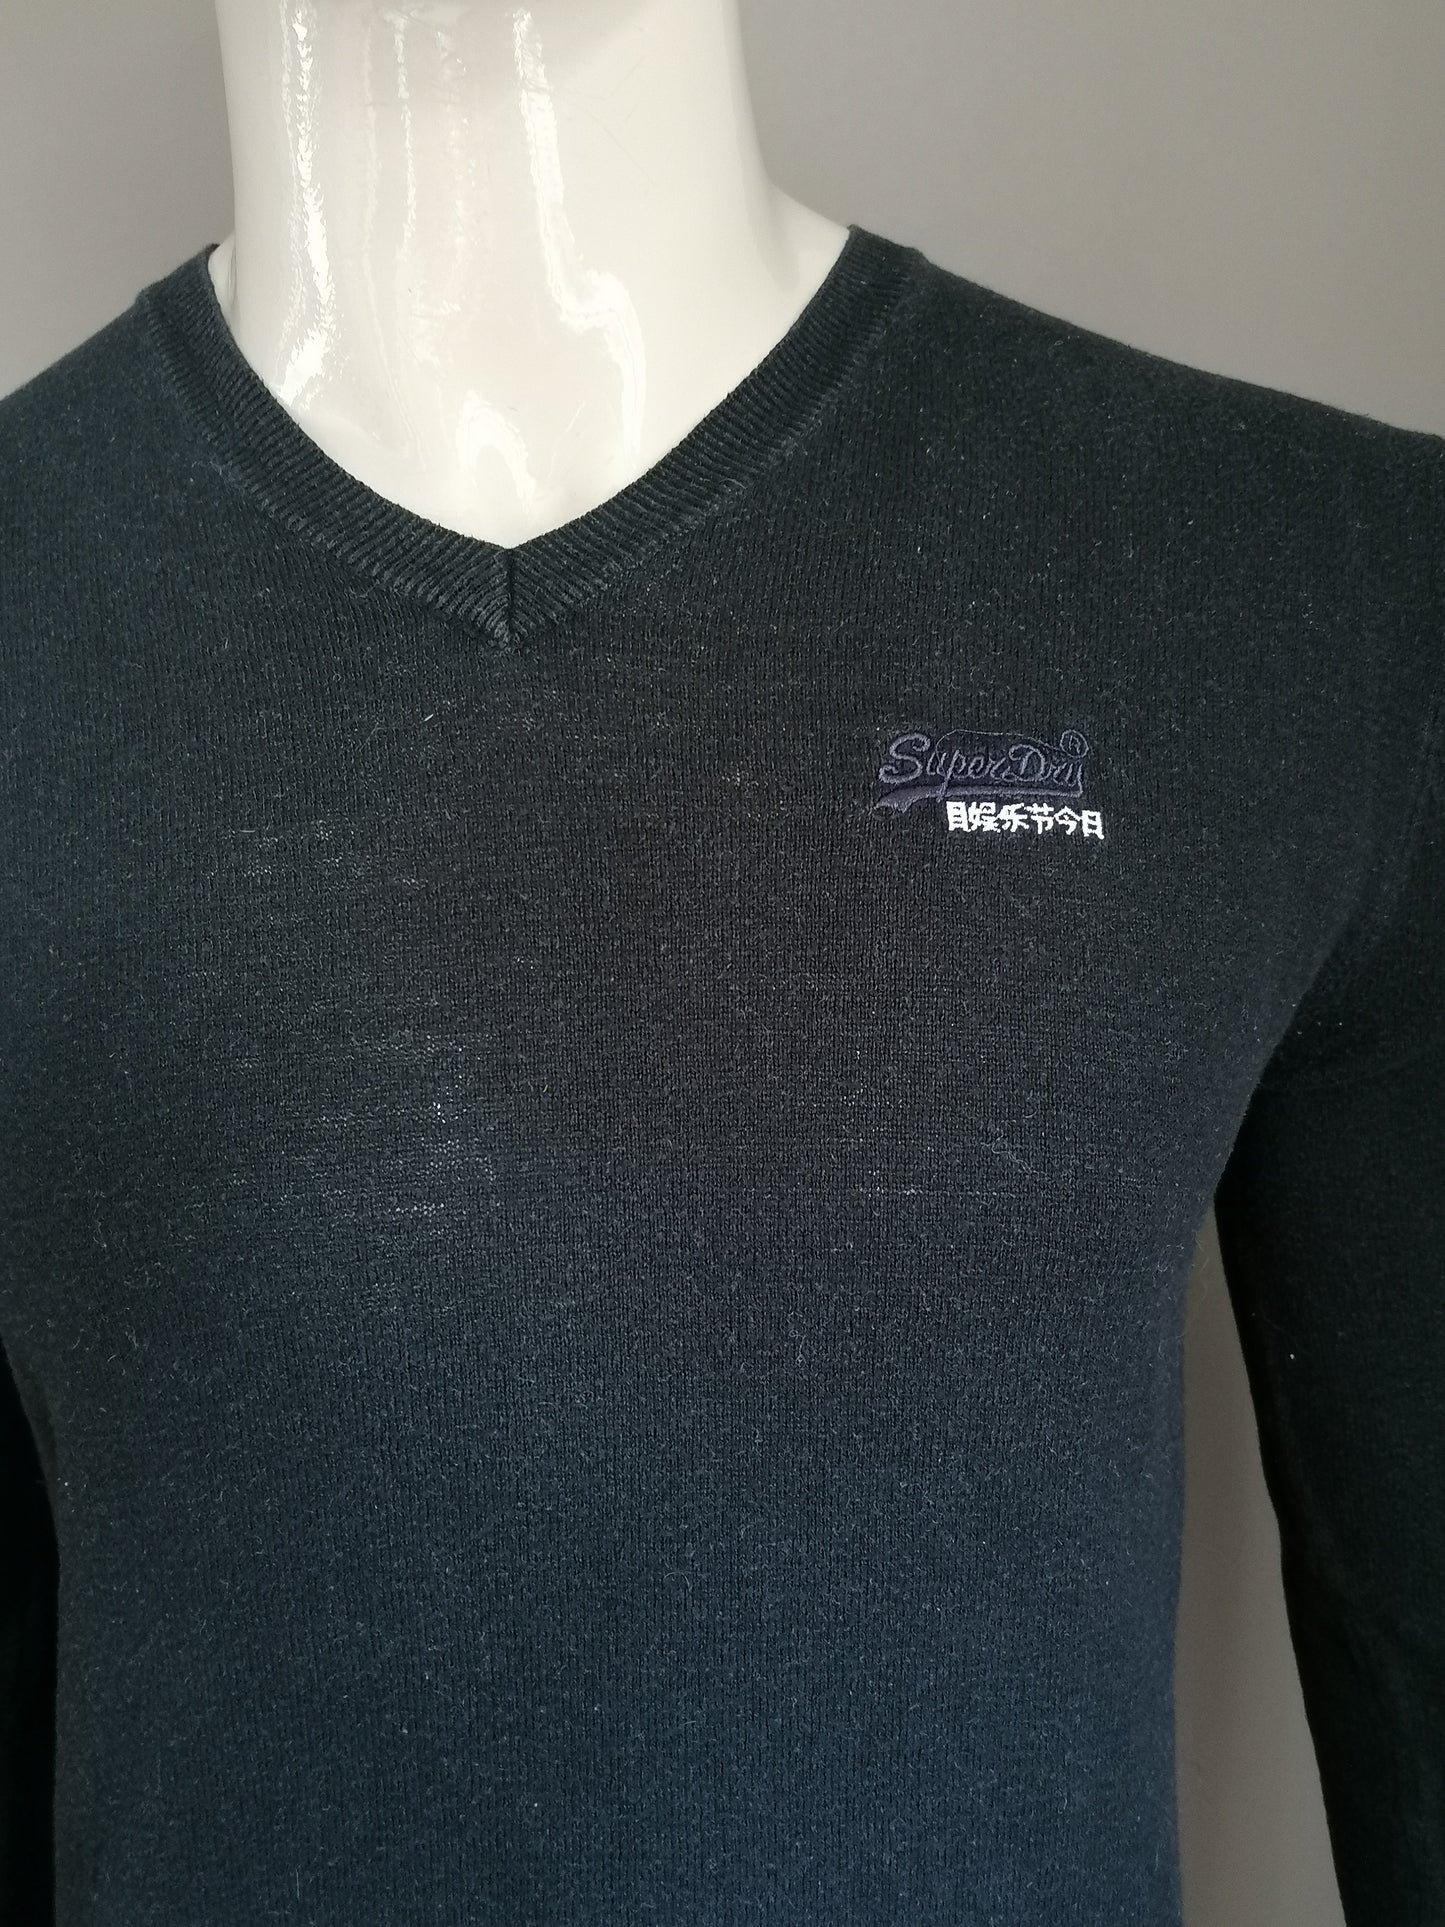 Superdry sweater with V-neck. Black colored. Size M.